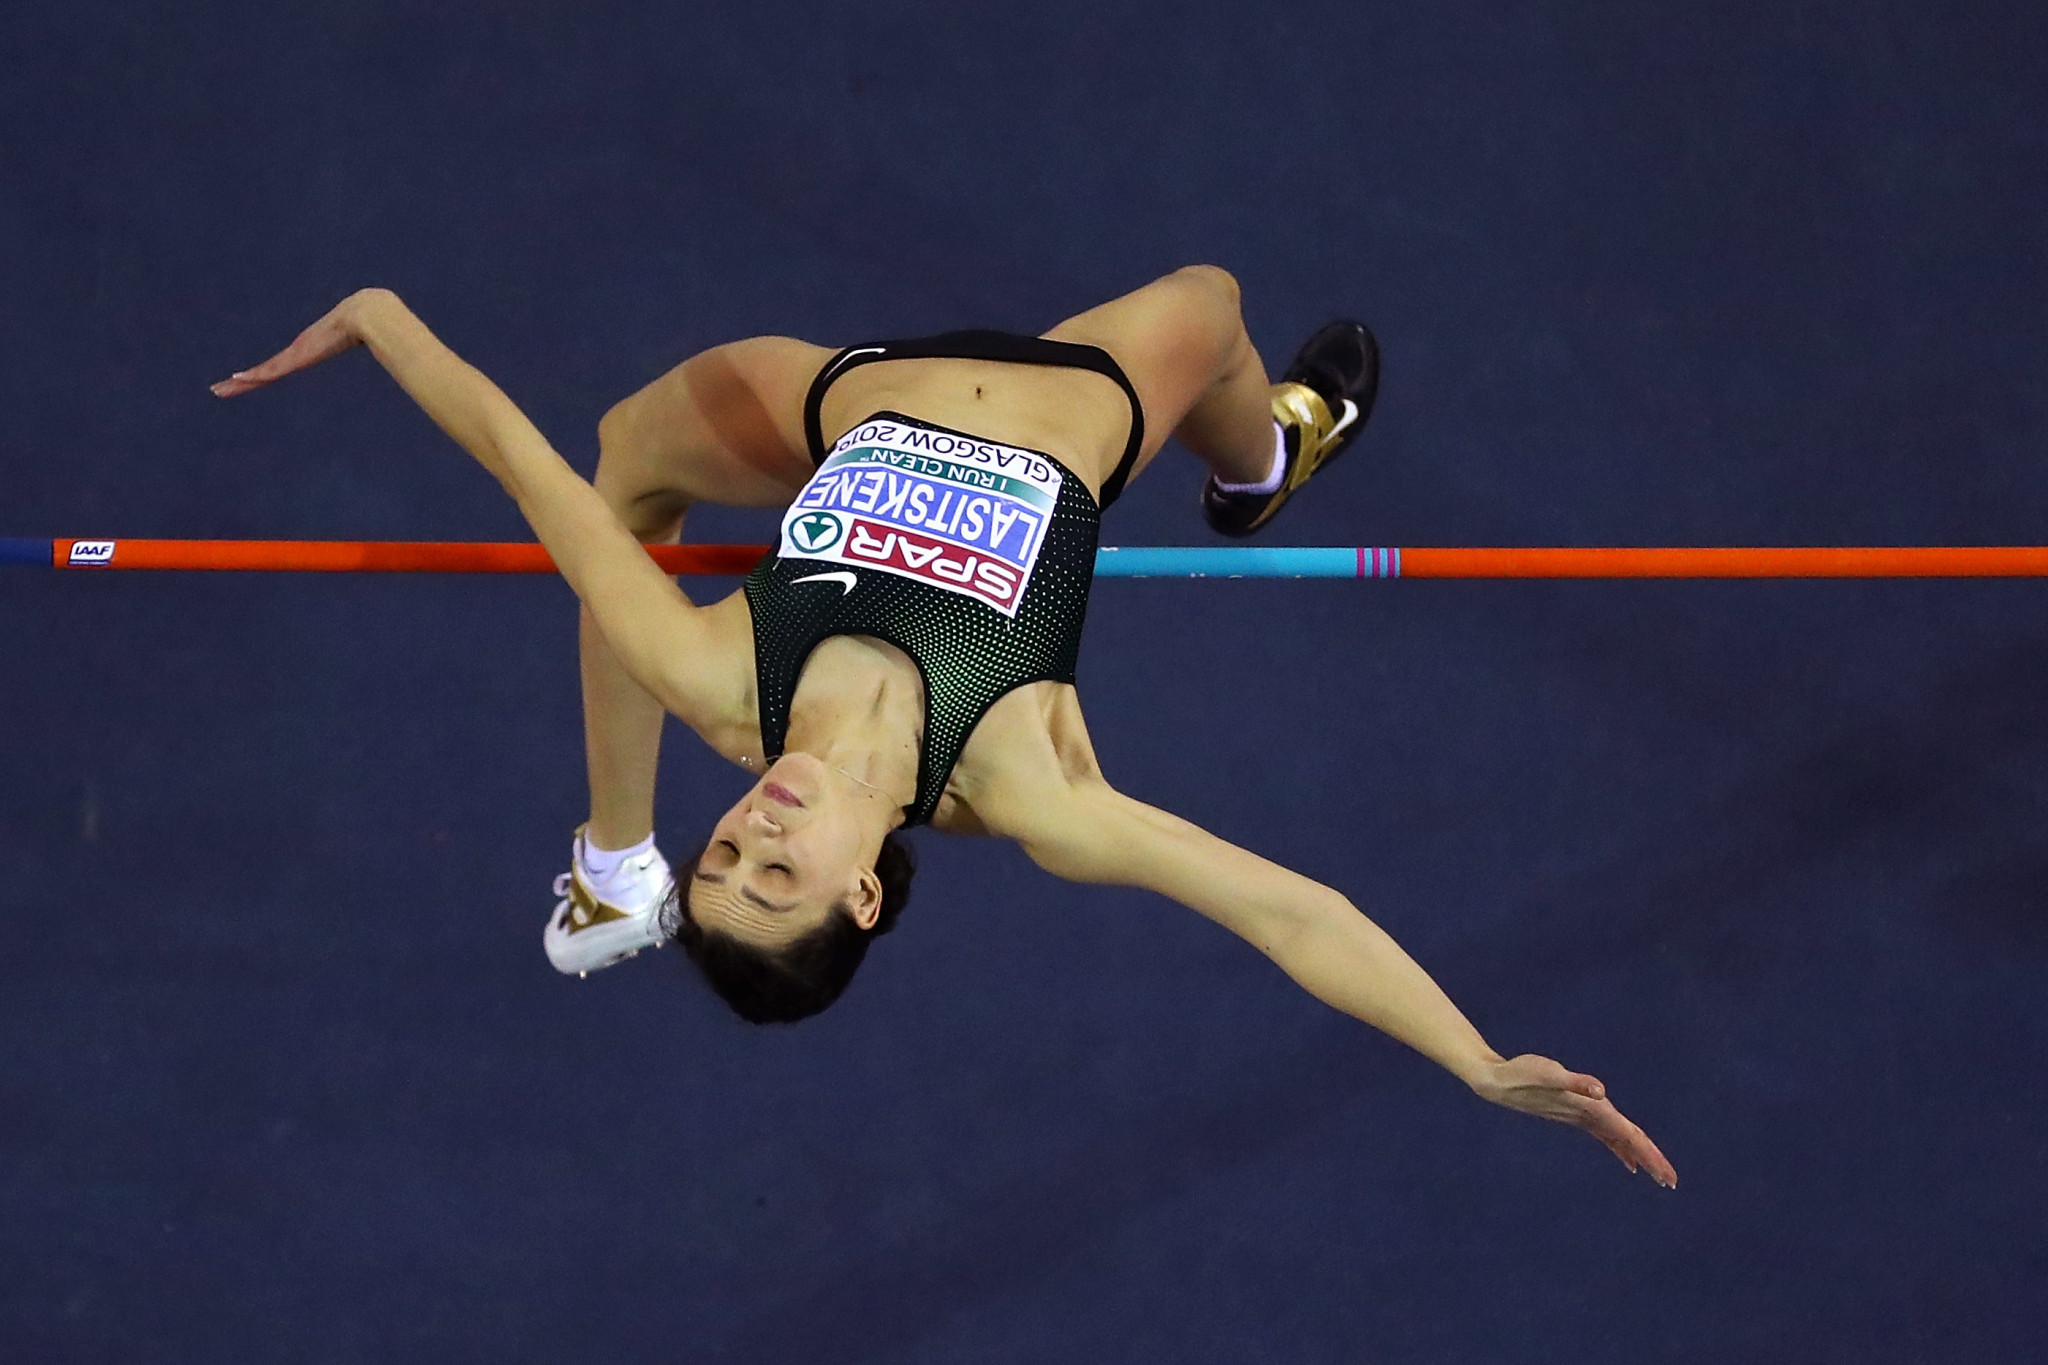 Mariya Lasitskene will be unable to defend her high jump title at this year's European Indoor Athletics Championships ©Getty Images